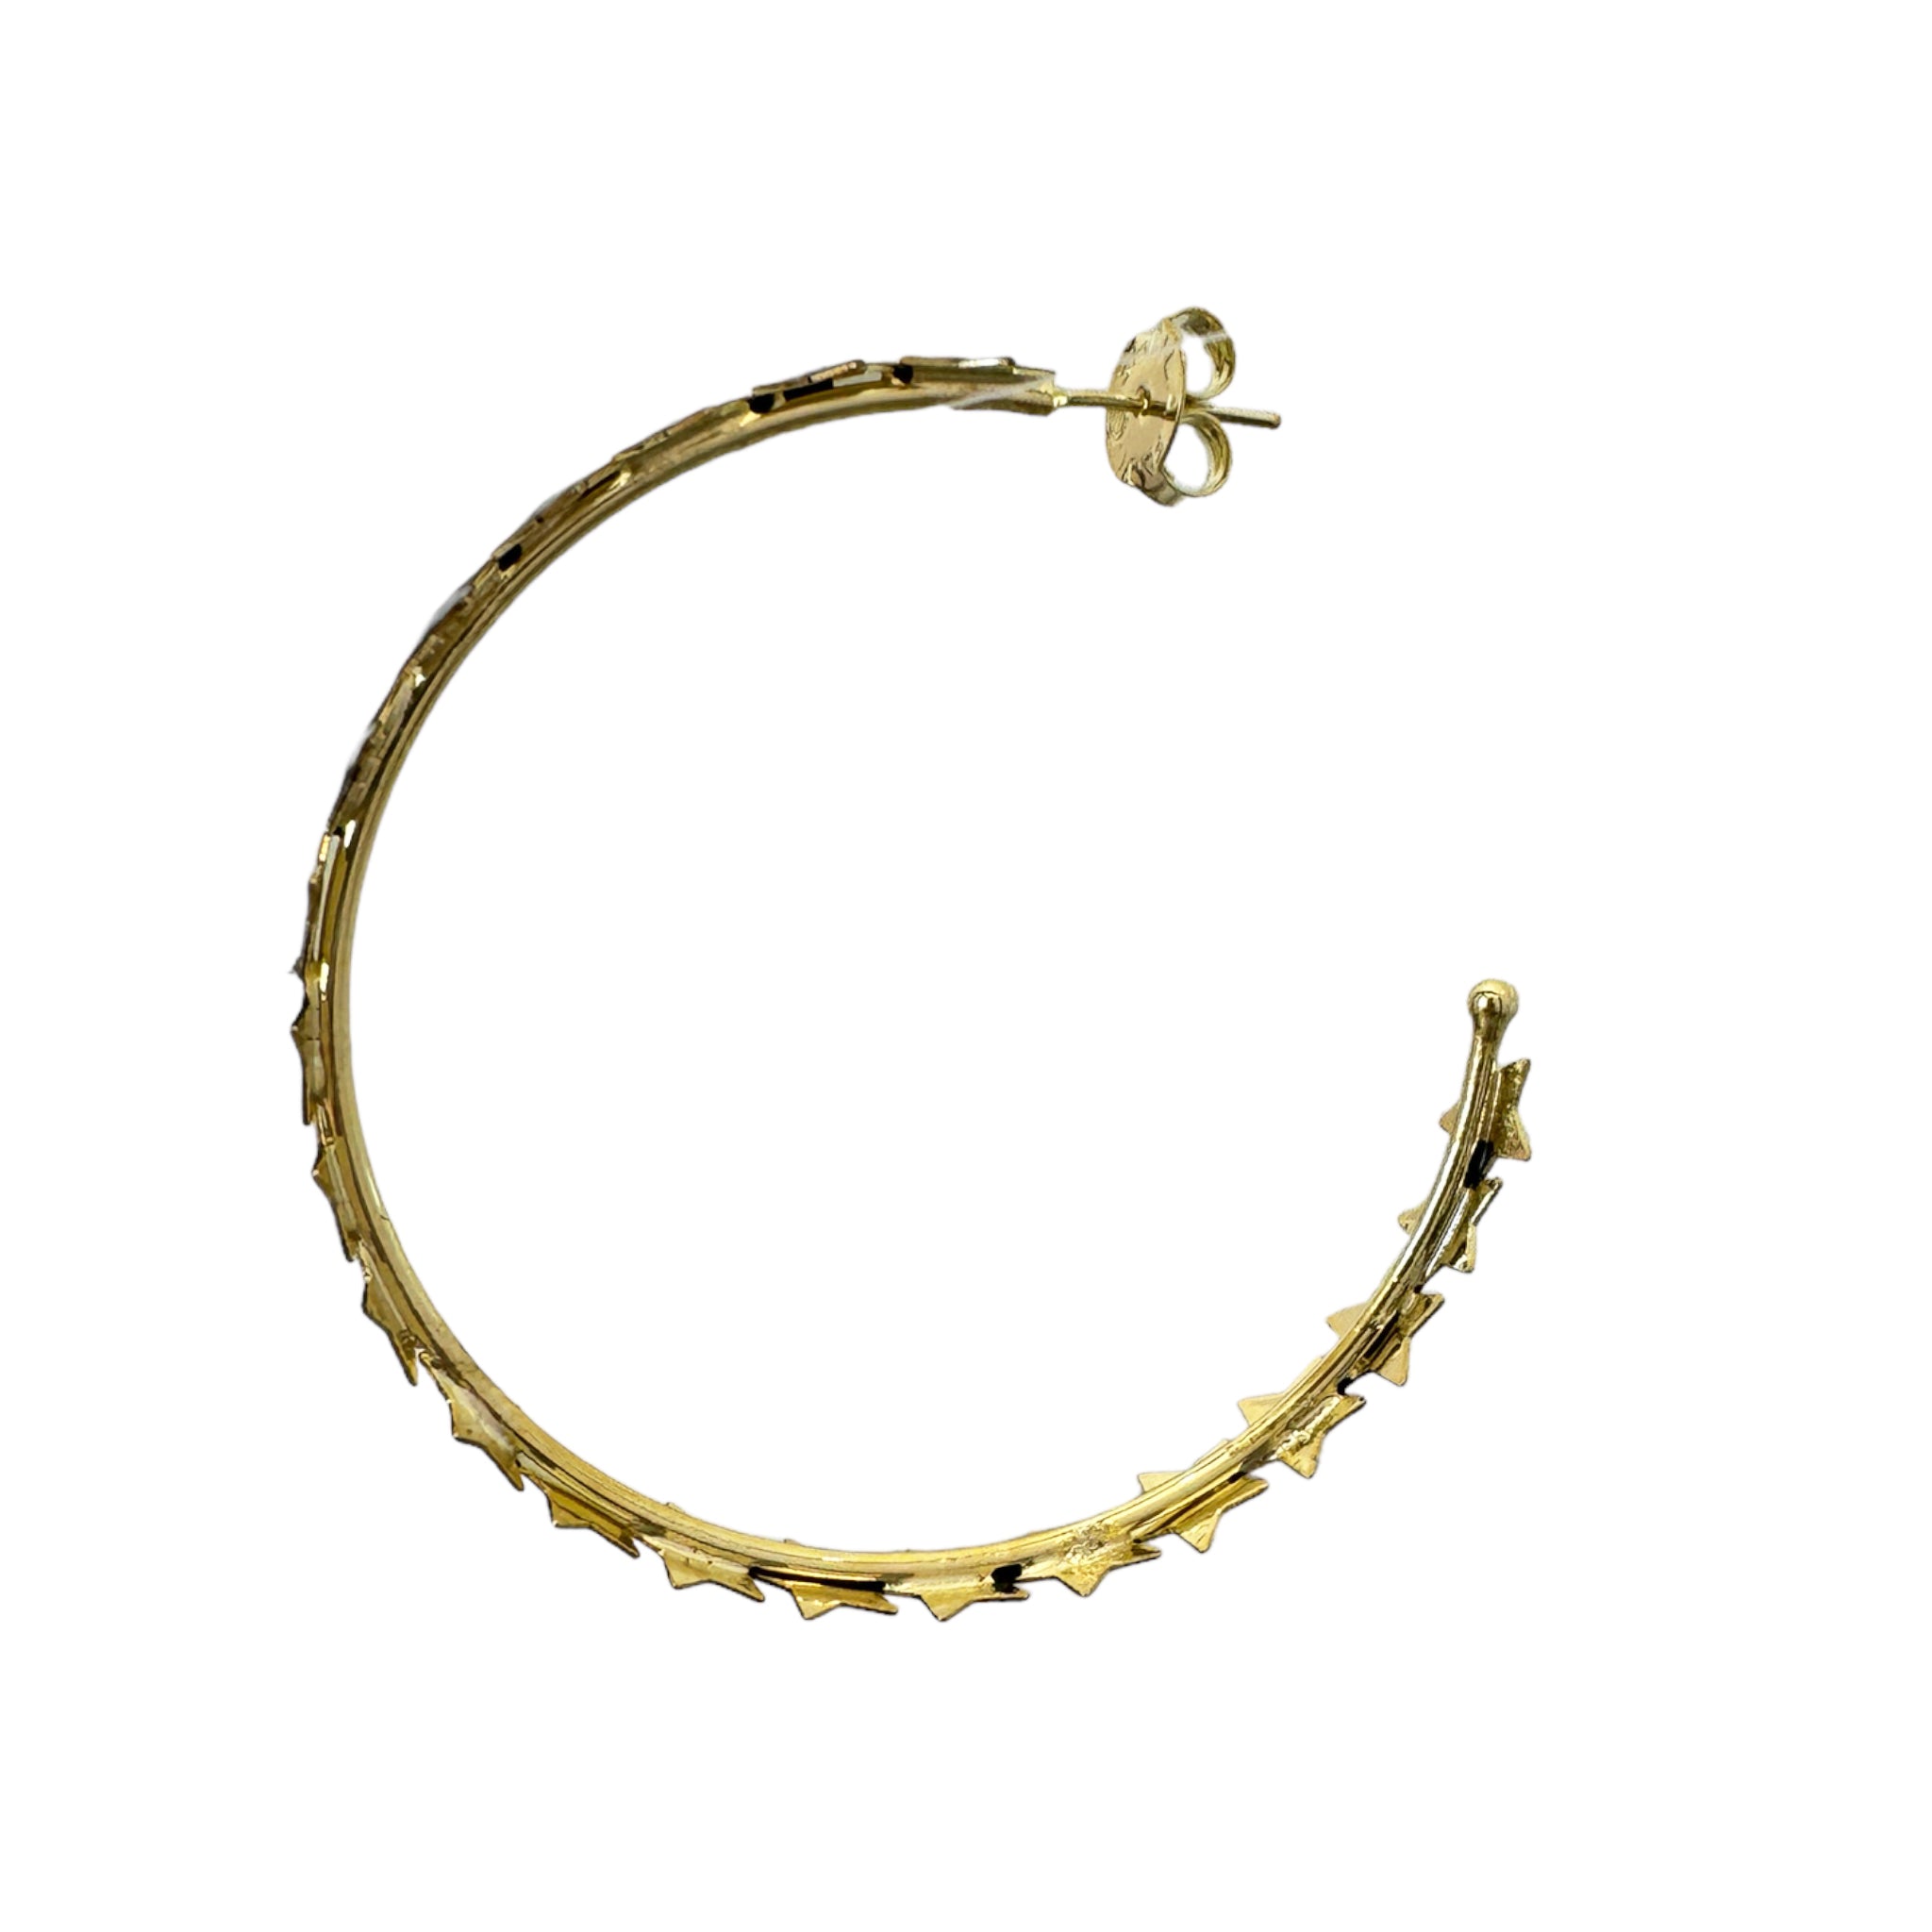 Sheila Fajl Small Corona Star Hoops in Black Resin and Gold Plated